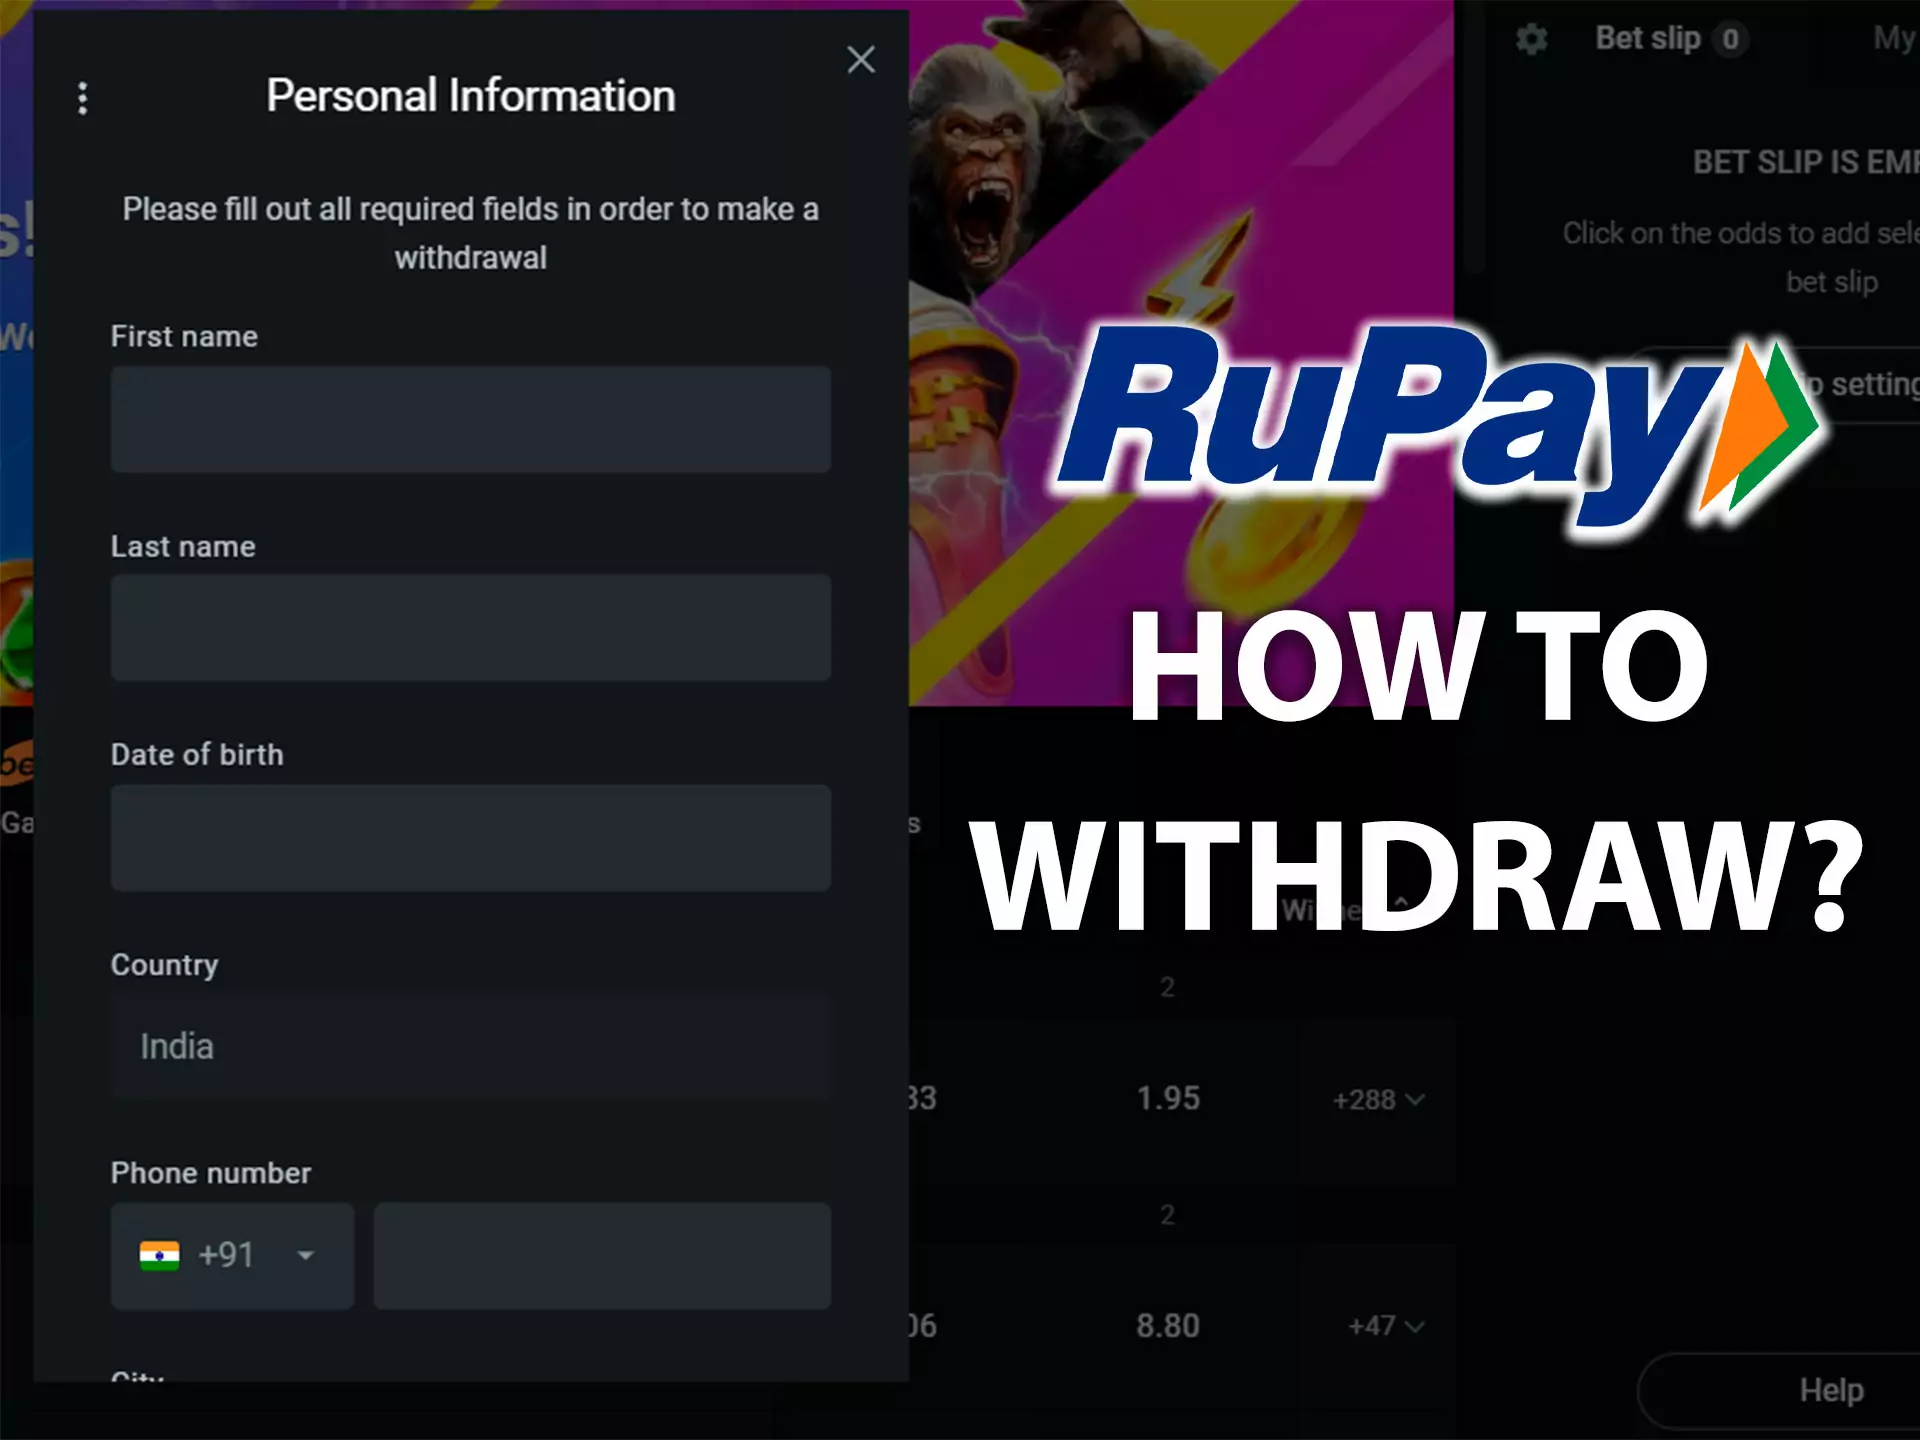 You can easily withdraw your winnings on the RuPay card.